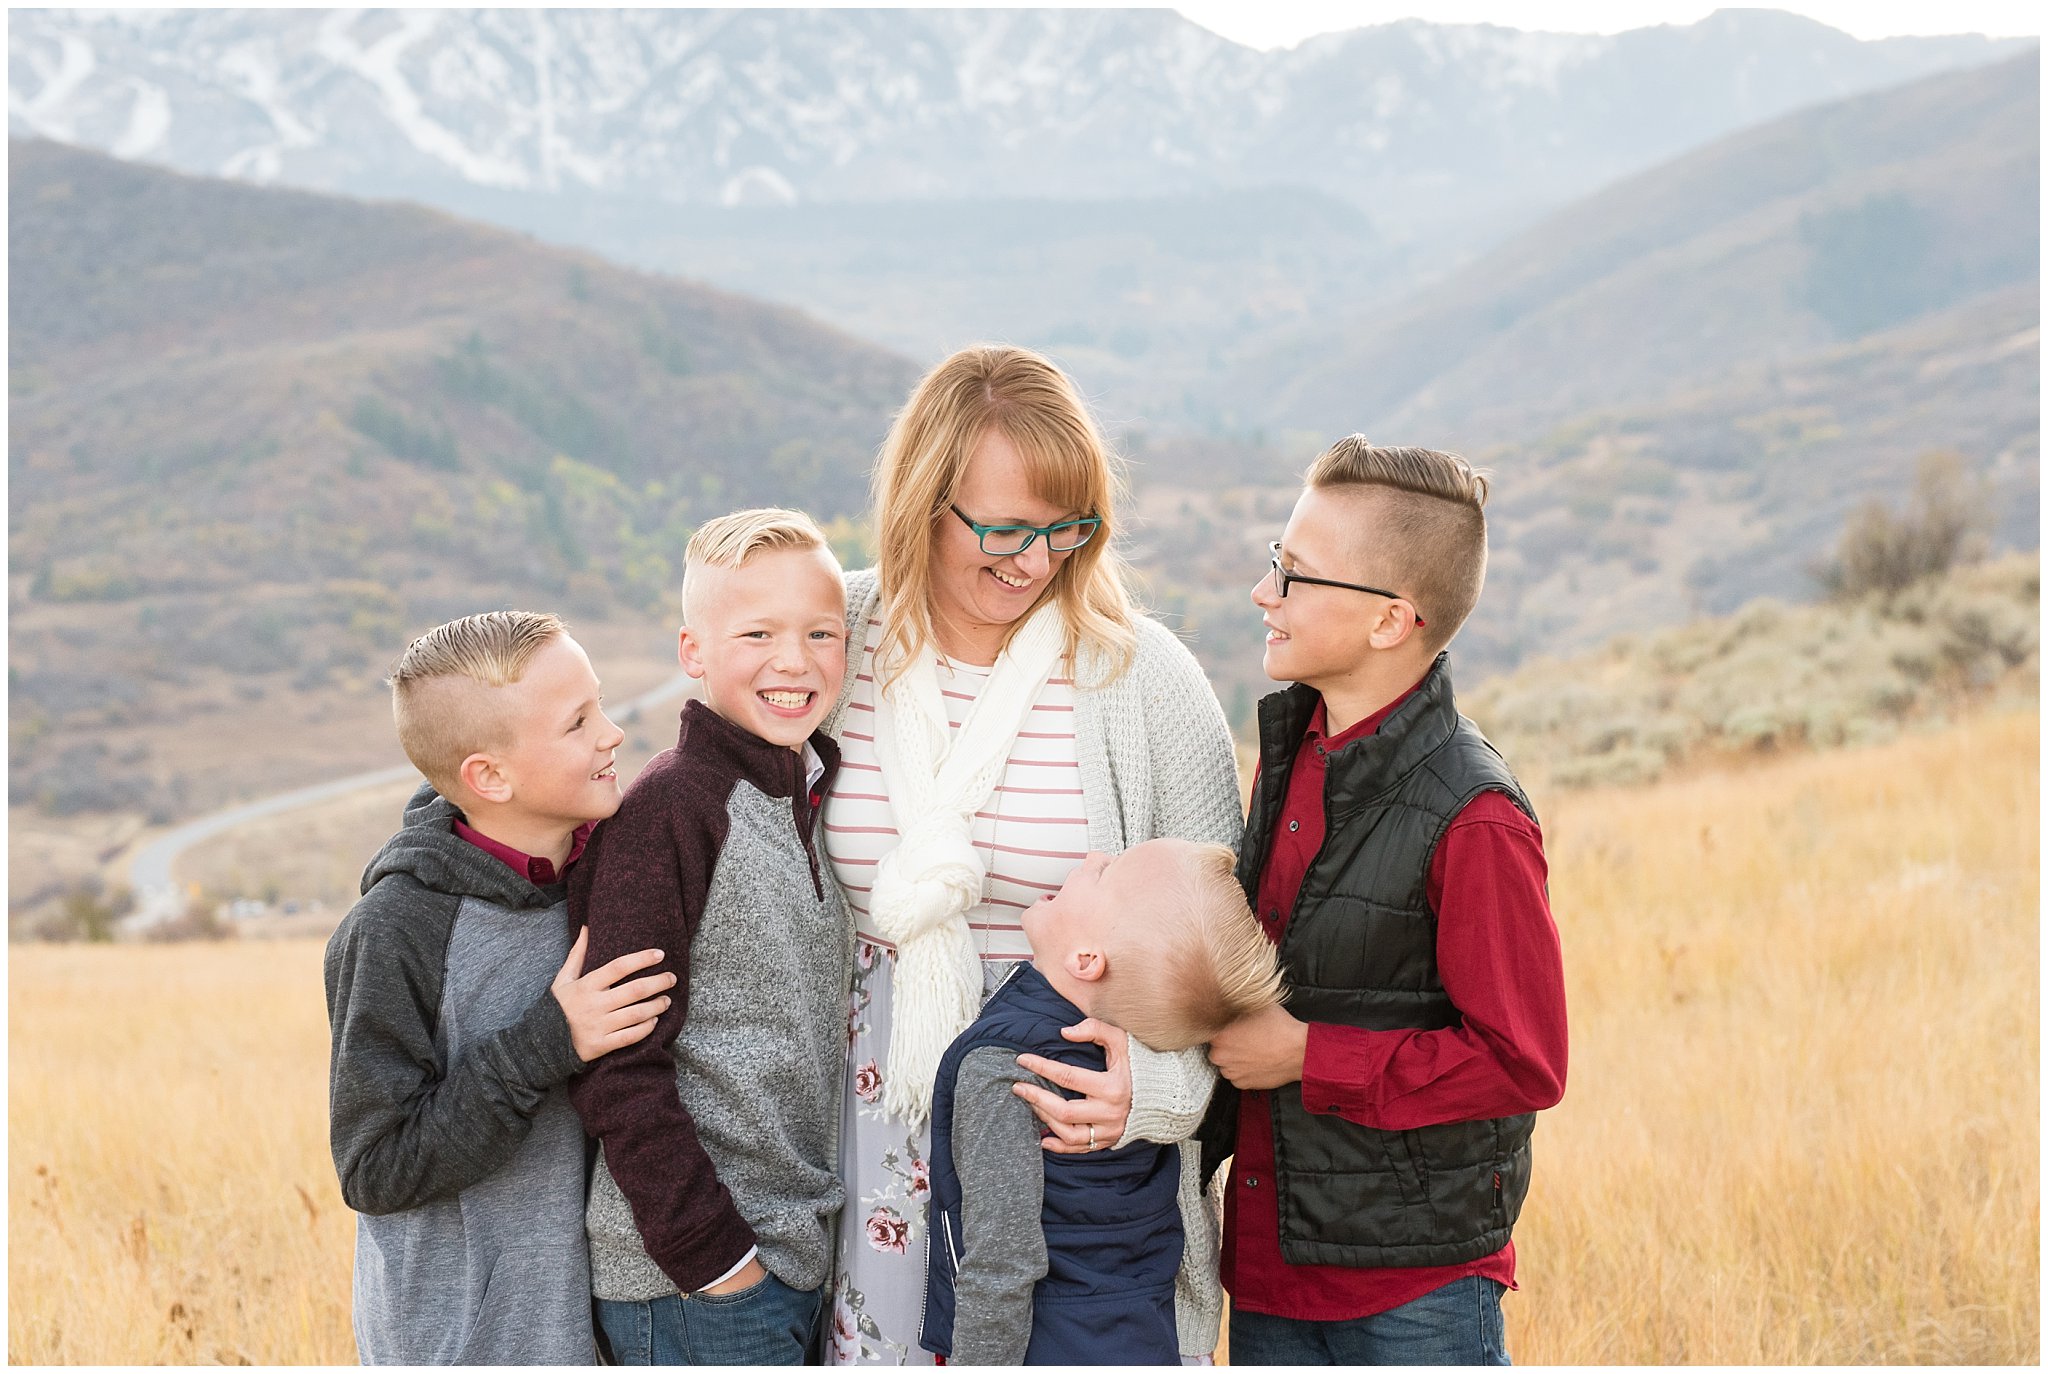 Mom and sons laughing and having fun in front of snowy mountains | Fall Family Pictures in the Mountains | Snowbasin, Utah | Jessie and Dallin Photography